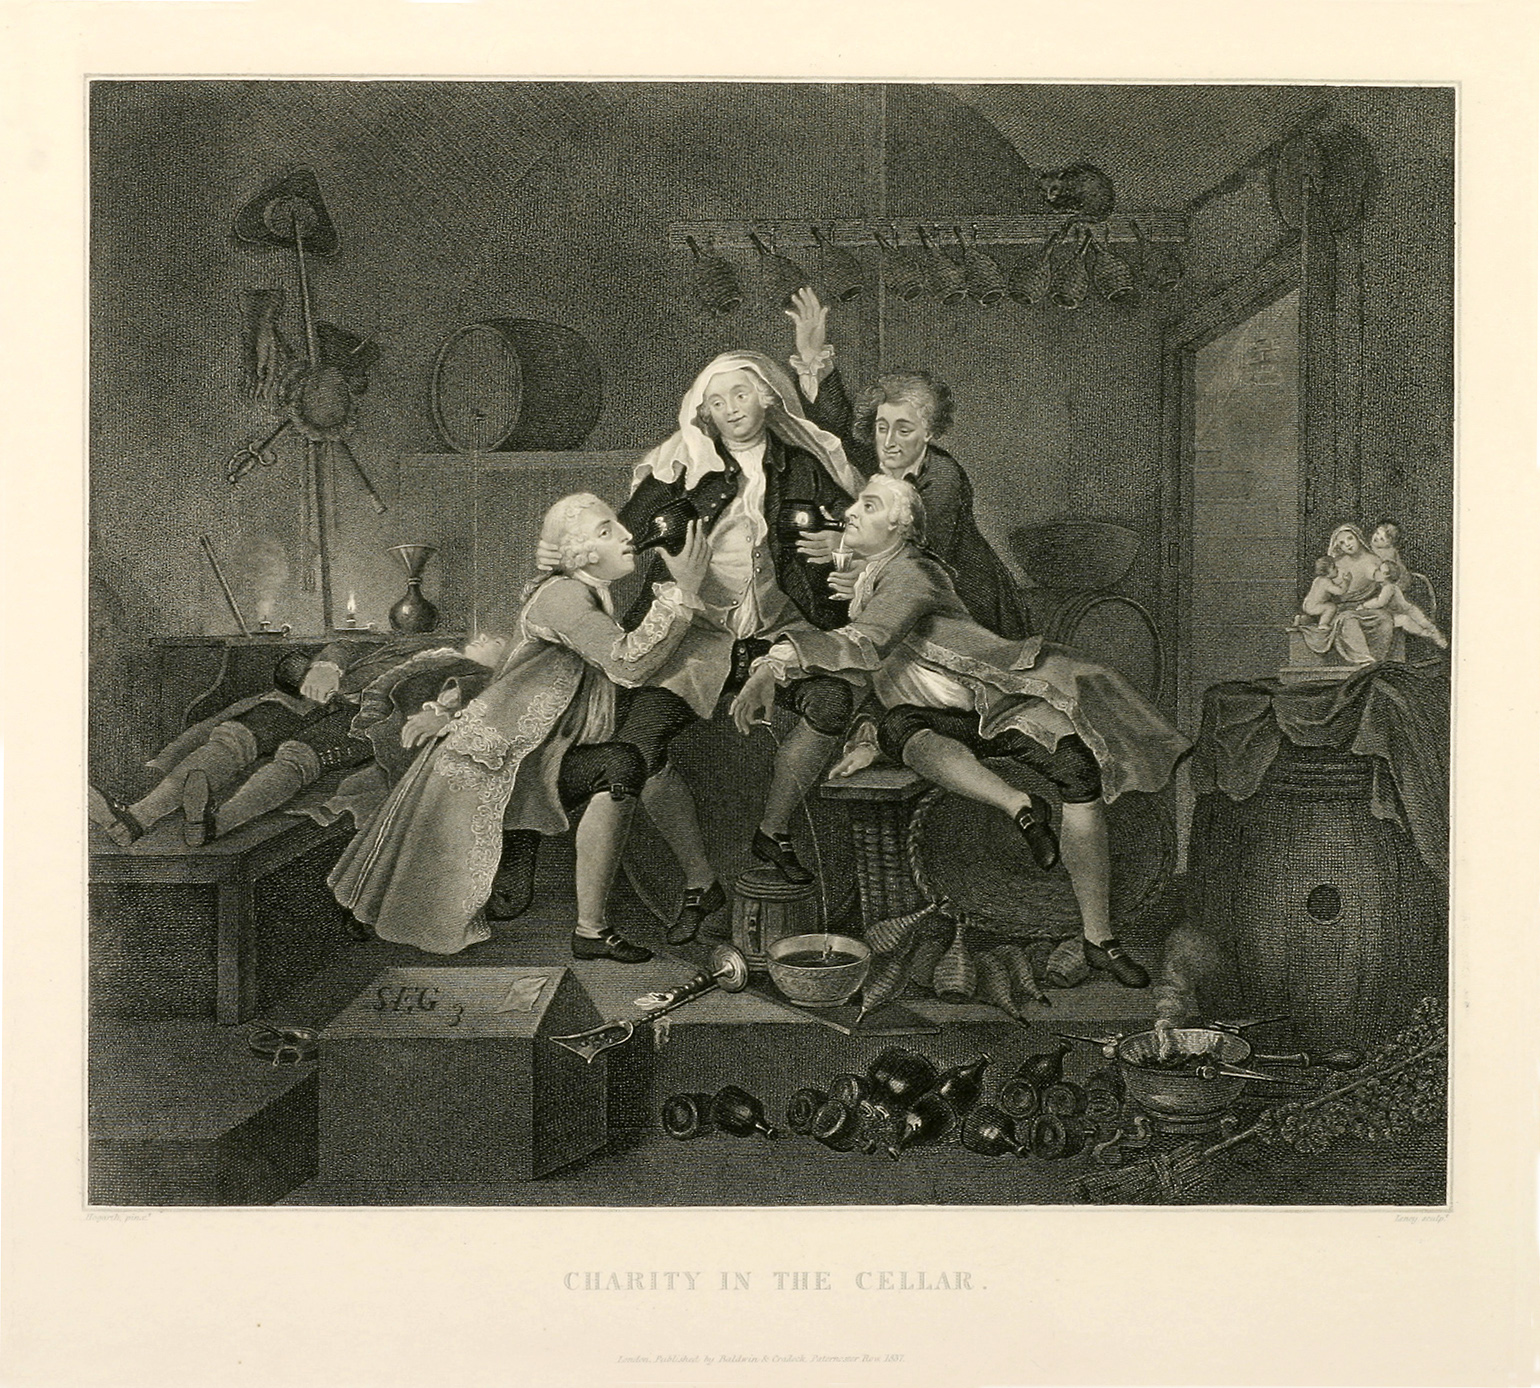 Charity in the Cellar - Antique Print from 1822